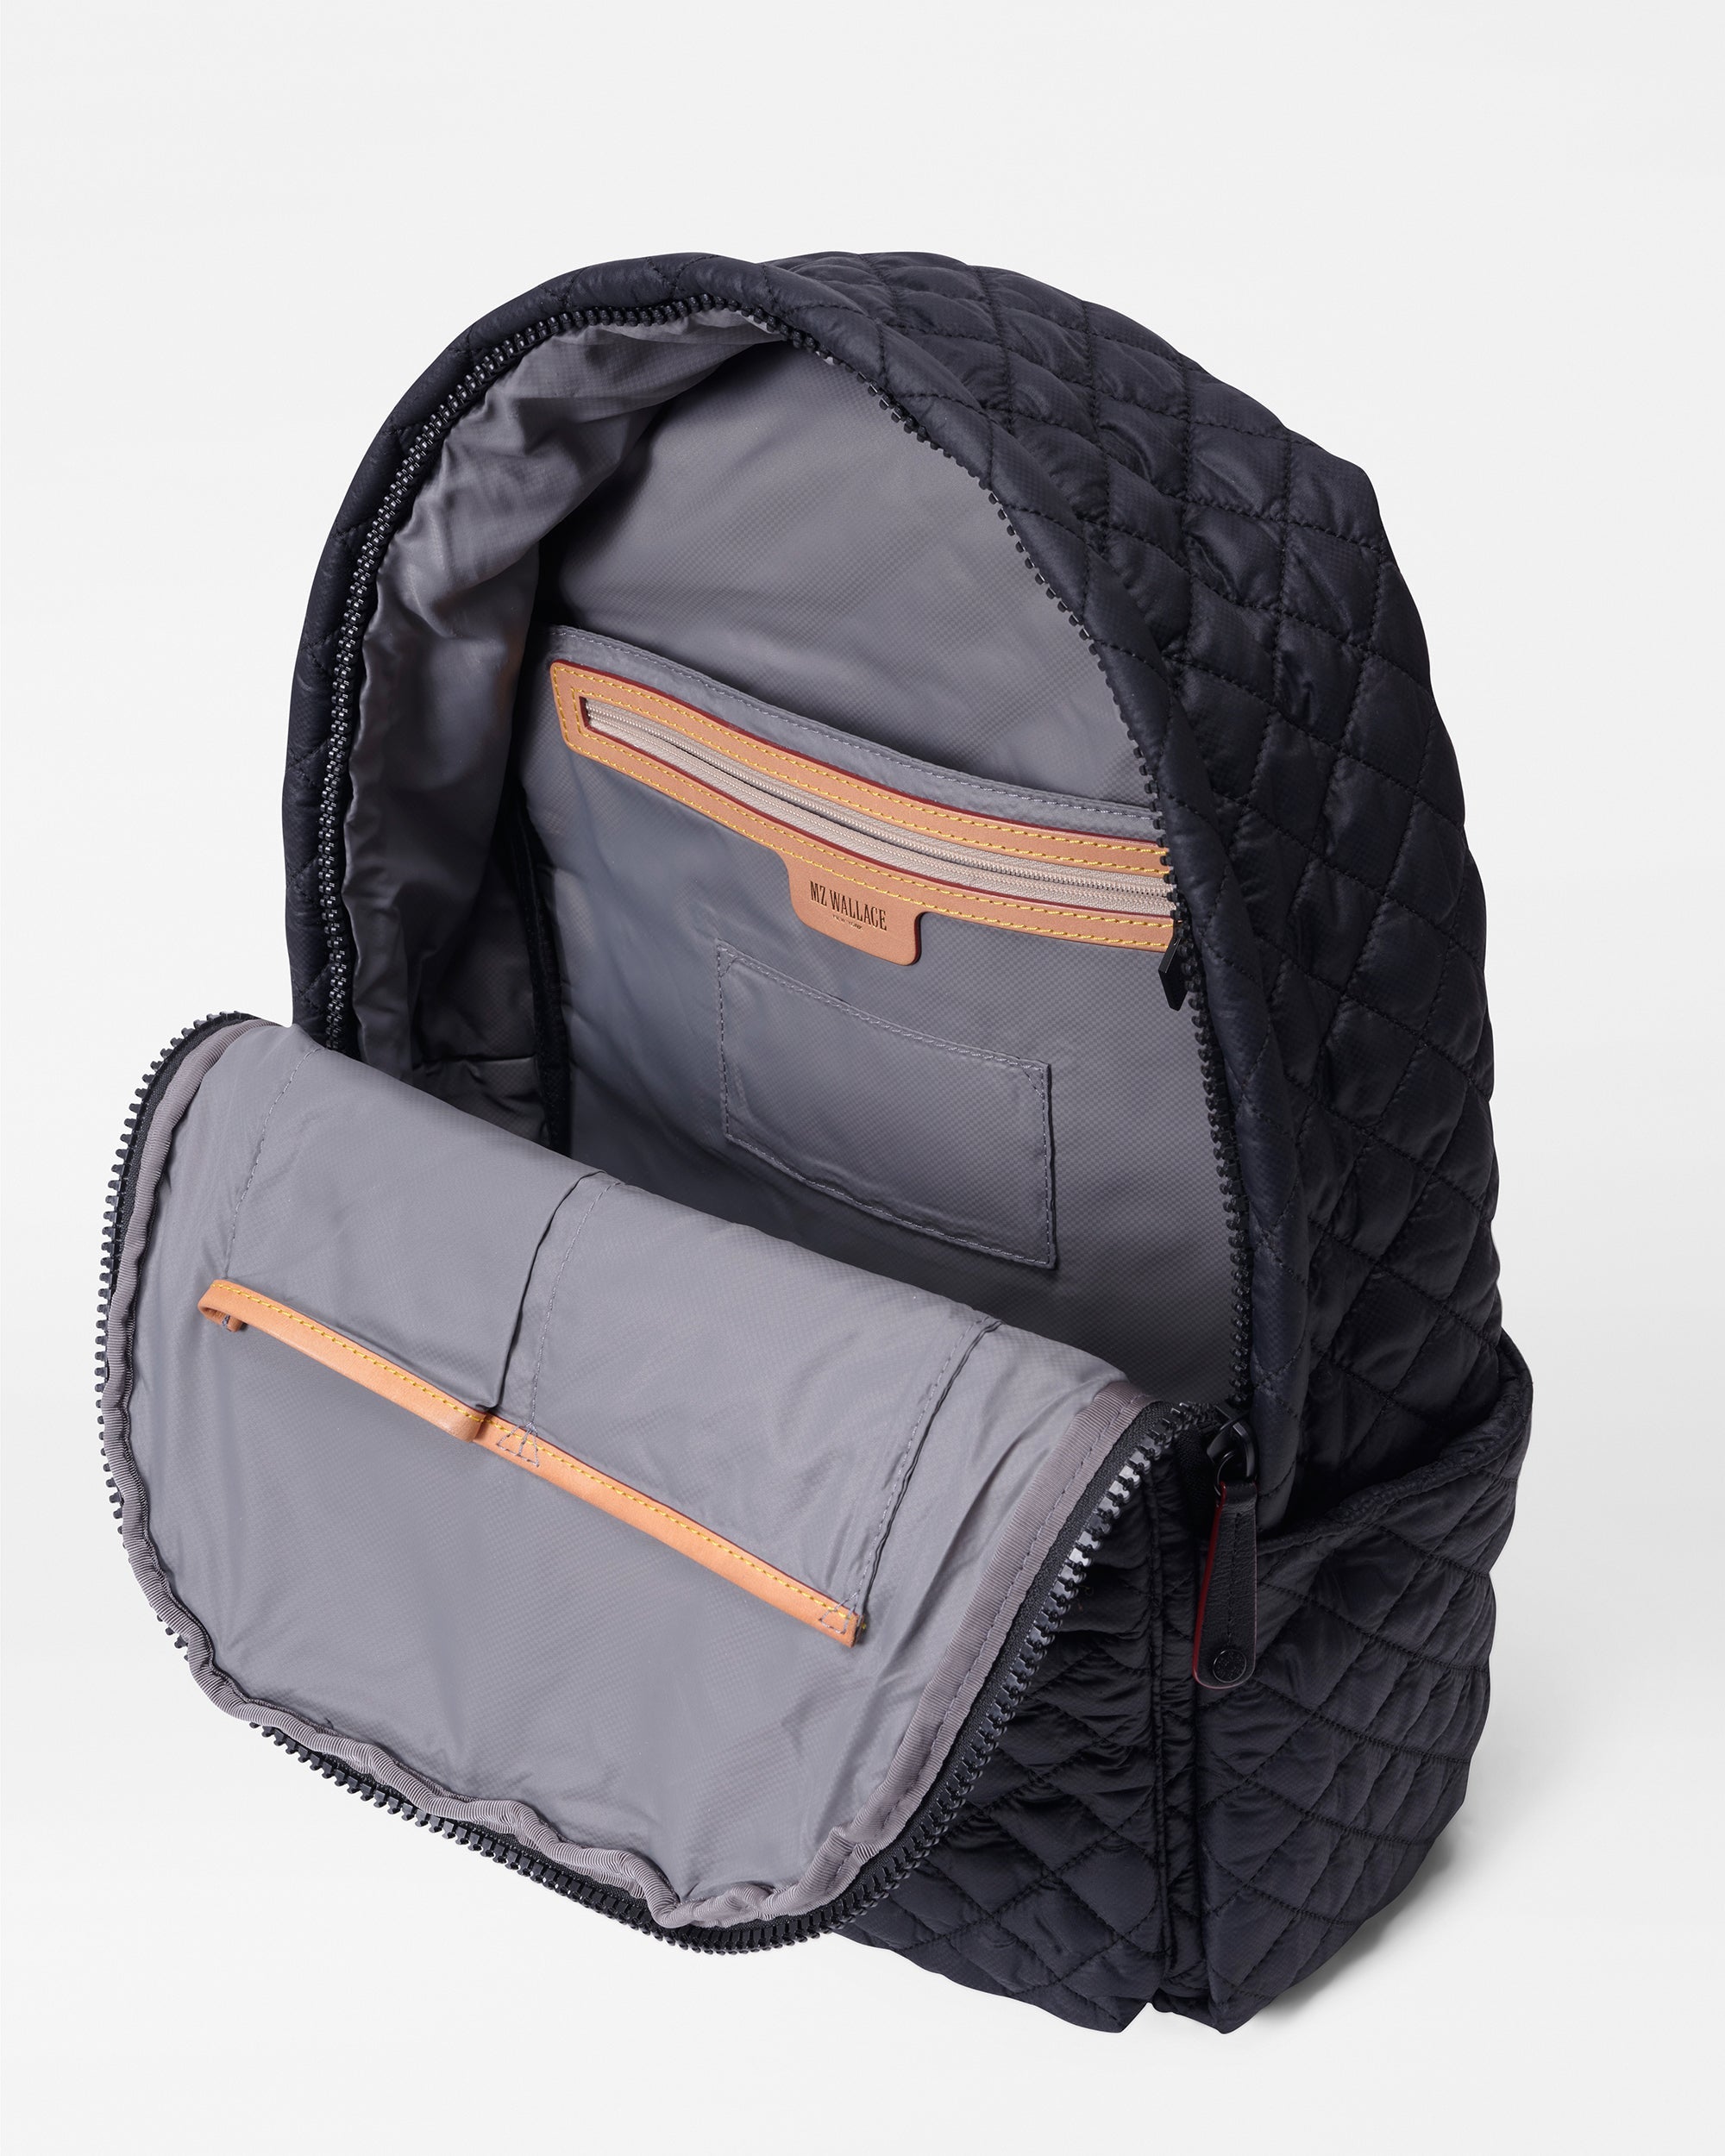 Shop MZ Wallace Metro Convertible Quilted Nylon Backpack